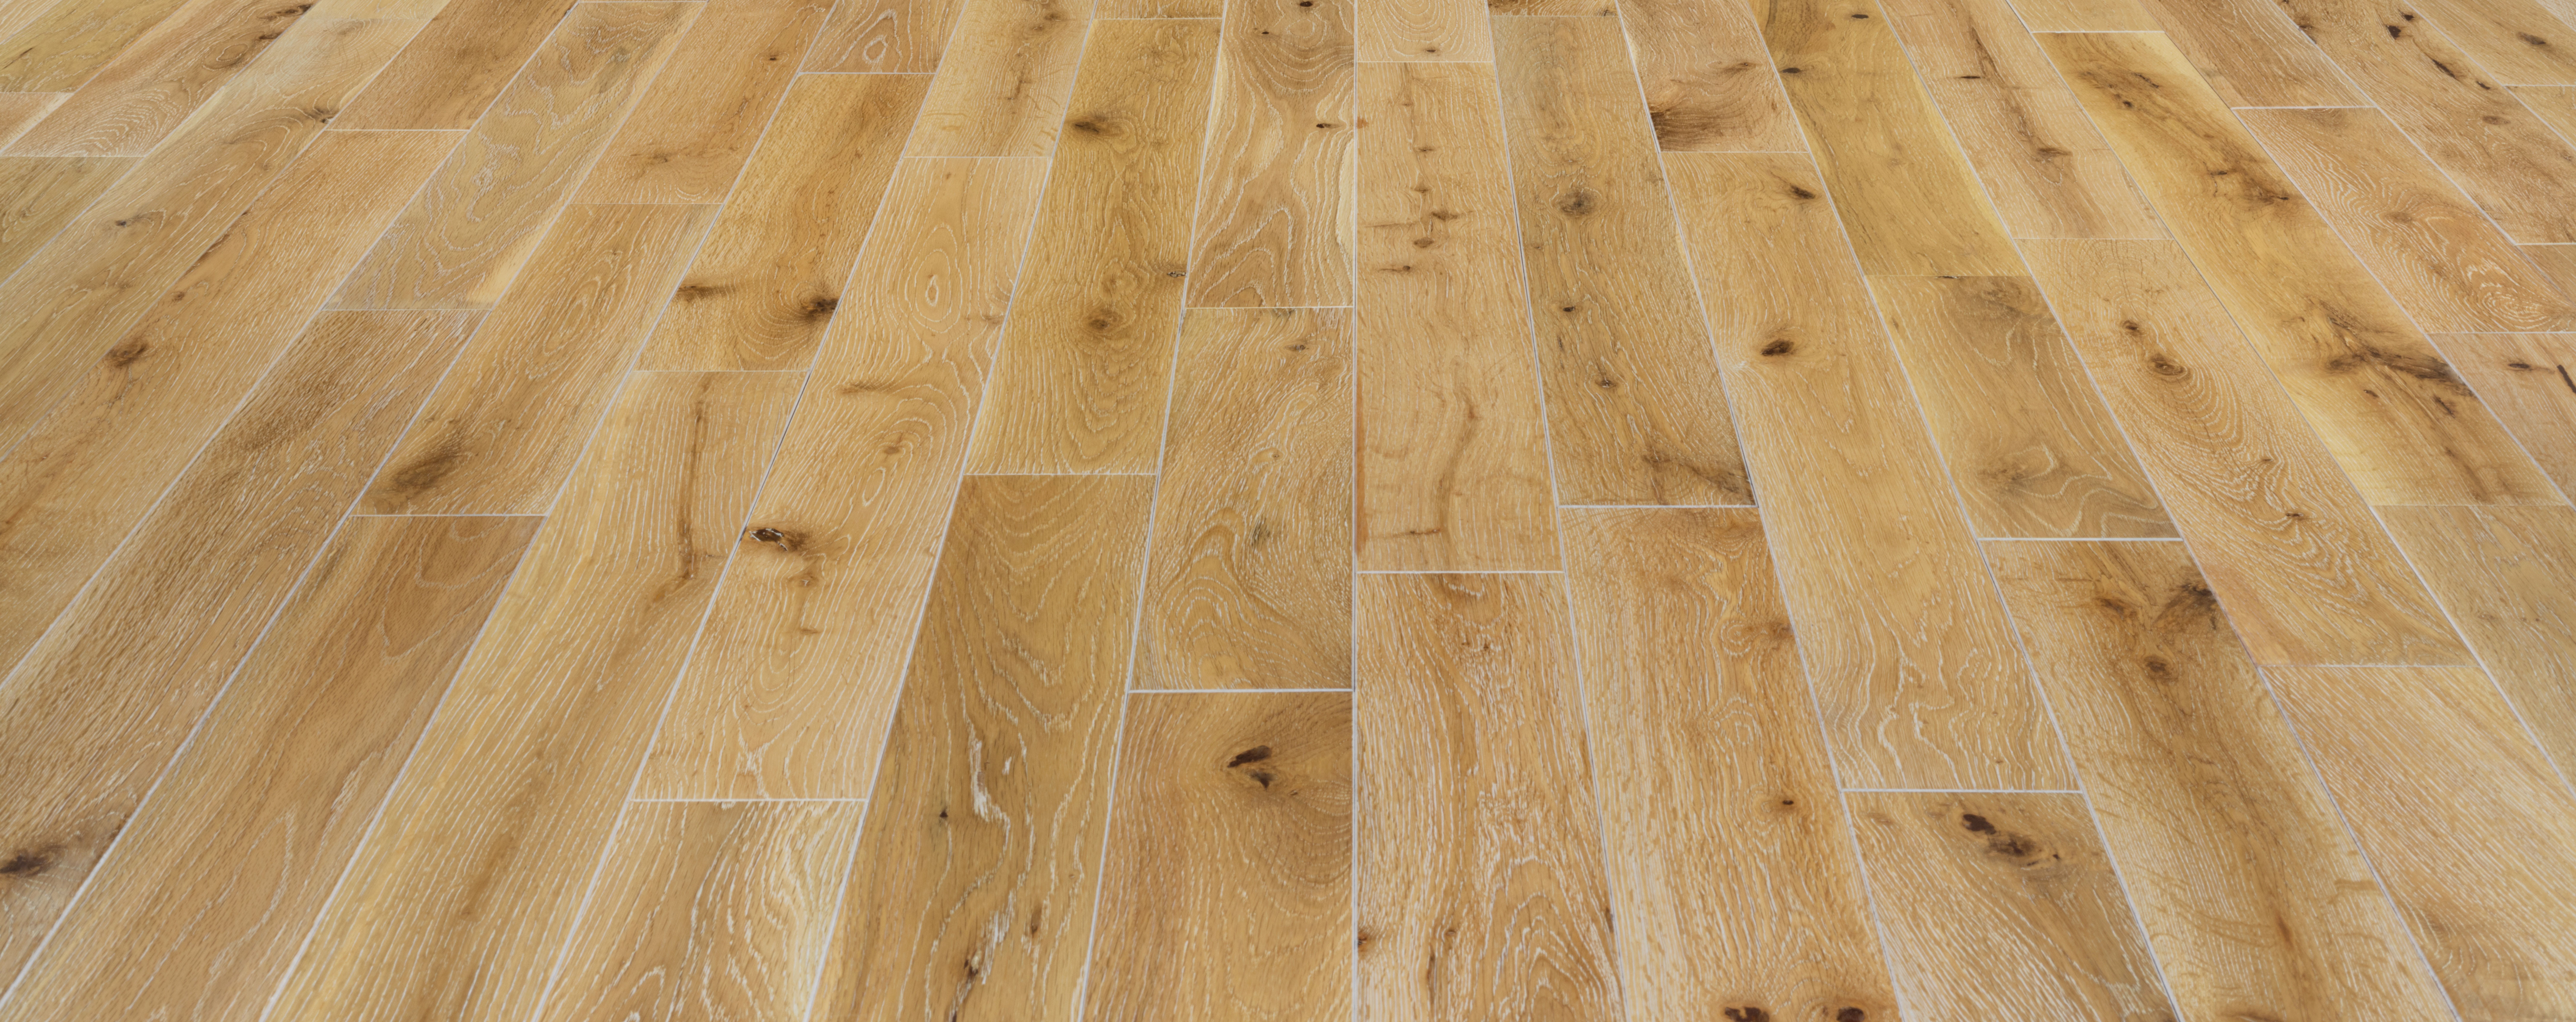 10 Awesome Hardwood Floor Stain Colors for White Oak 2024 free download hardwood floor stain colors for white oak of harbor oak 3 1 2e280b3 white oak white washed etx surfaces pertaining to etx surfaces harbor oak white oak white washed wood flooring